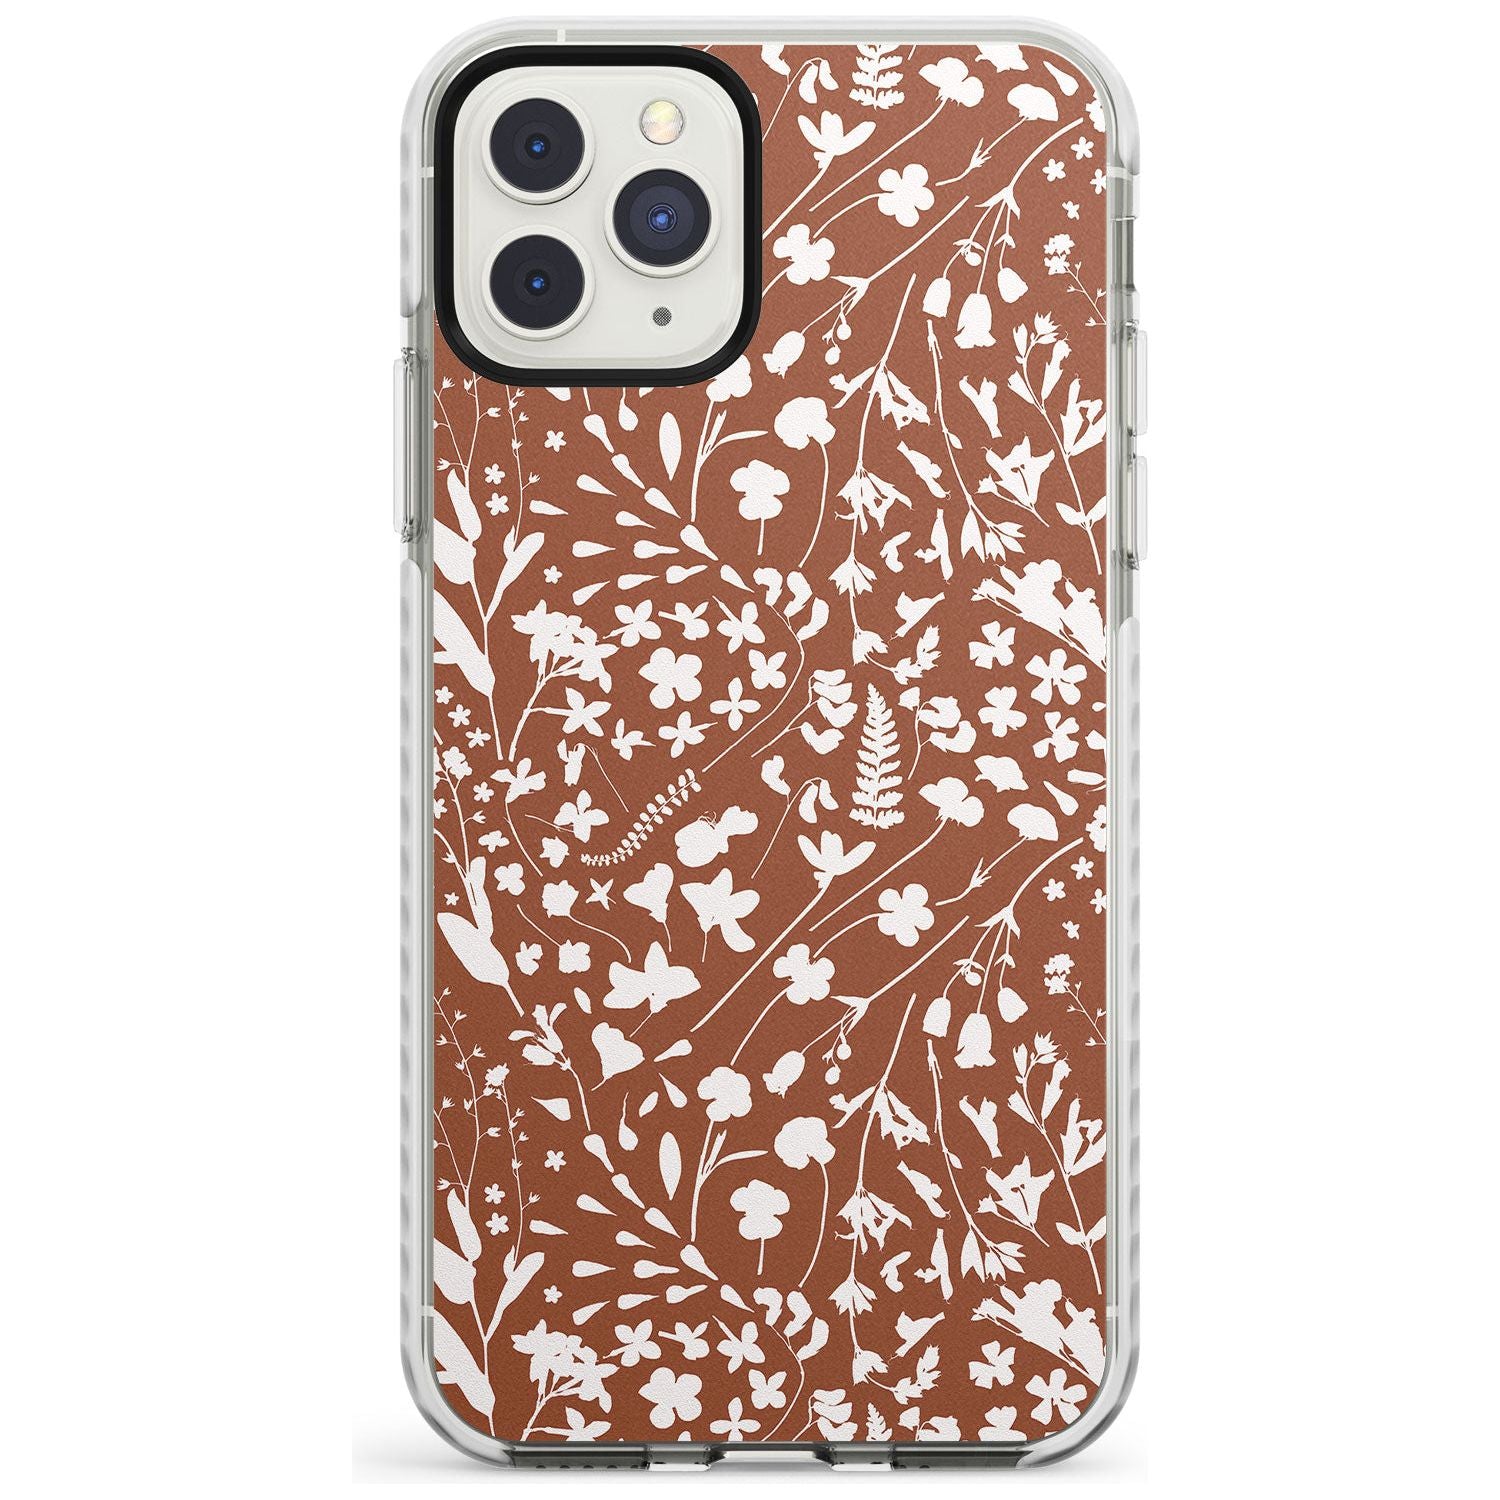 Wildflower Cluster on Terracotta Impact Phone Case for iPhone 11 Pro Max